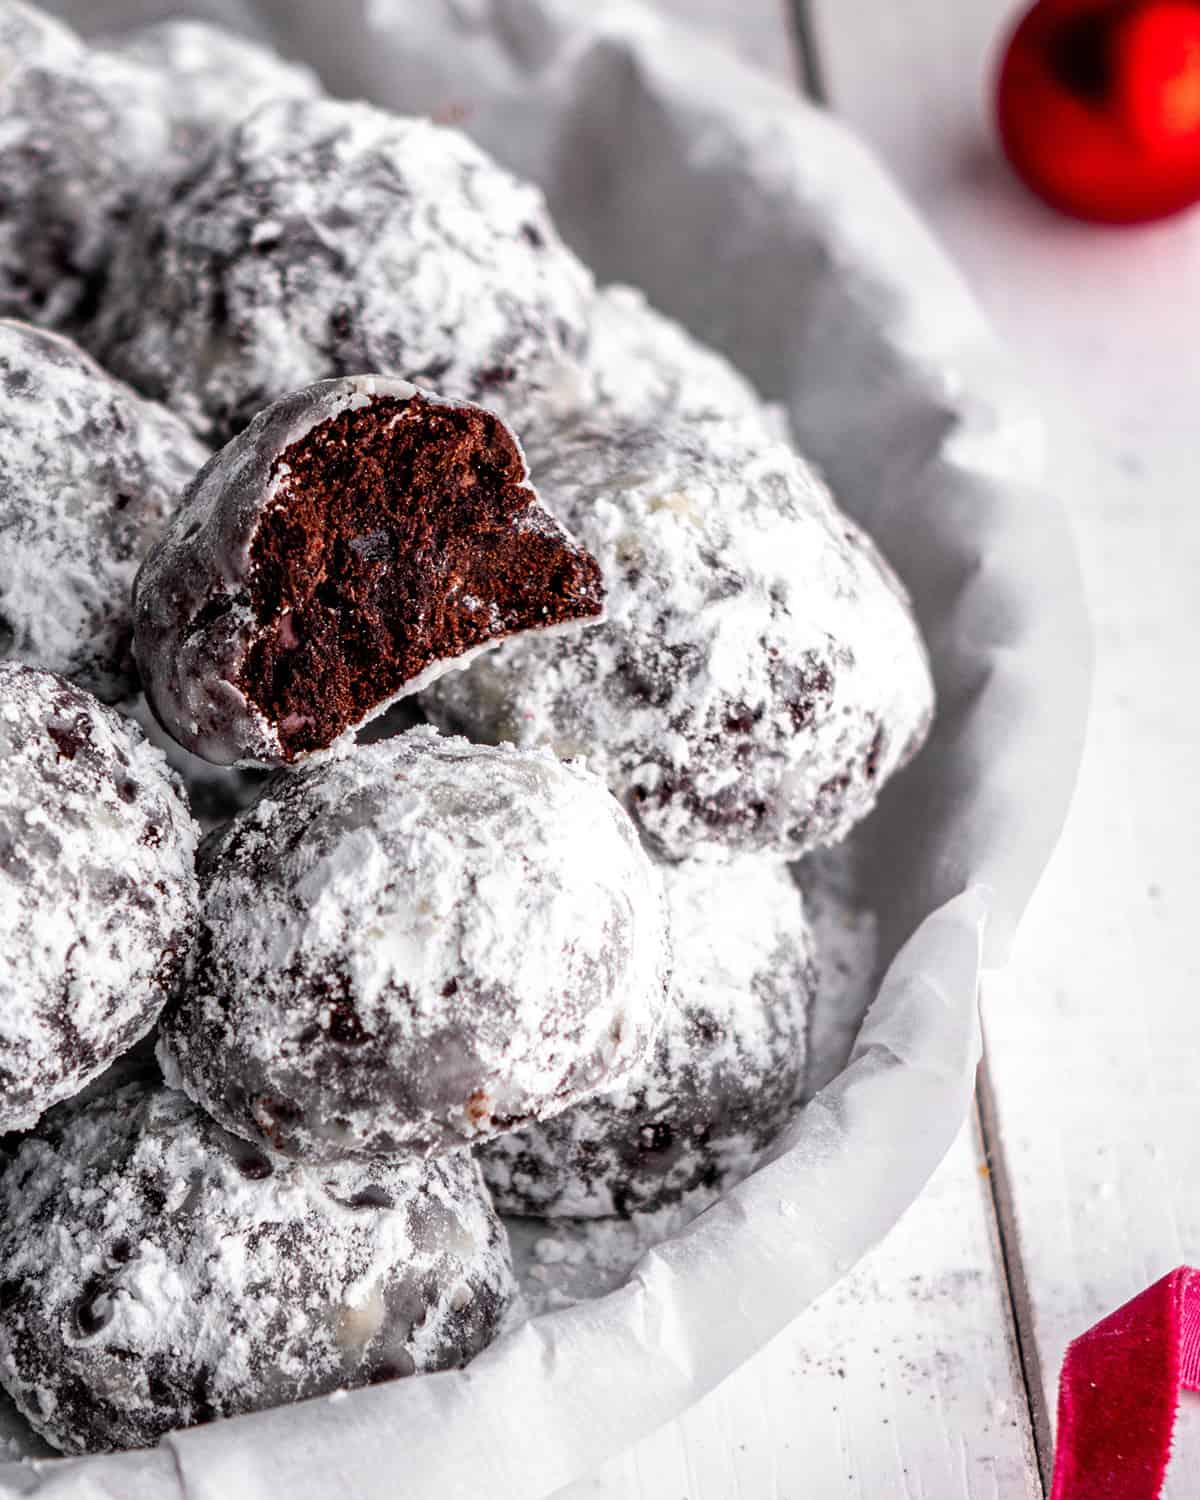 Chocolate Snowball Cookies in a serving dish, one has a bite taken out of it so you can see the inside